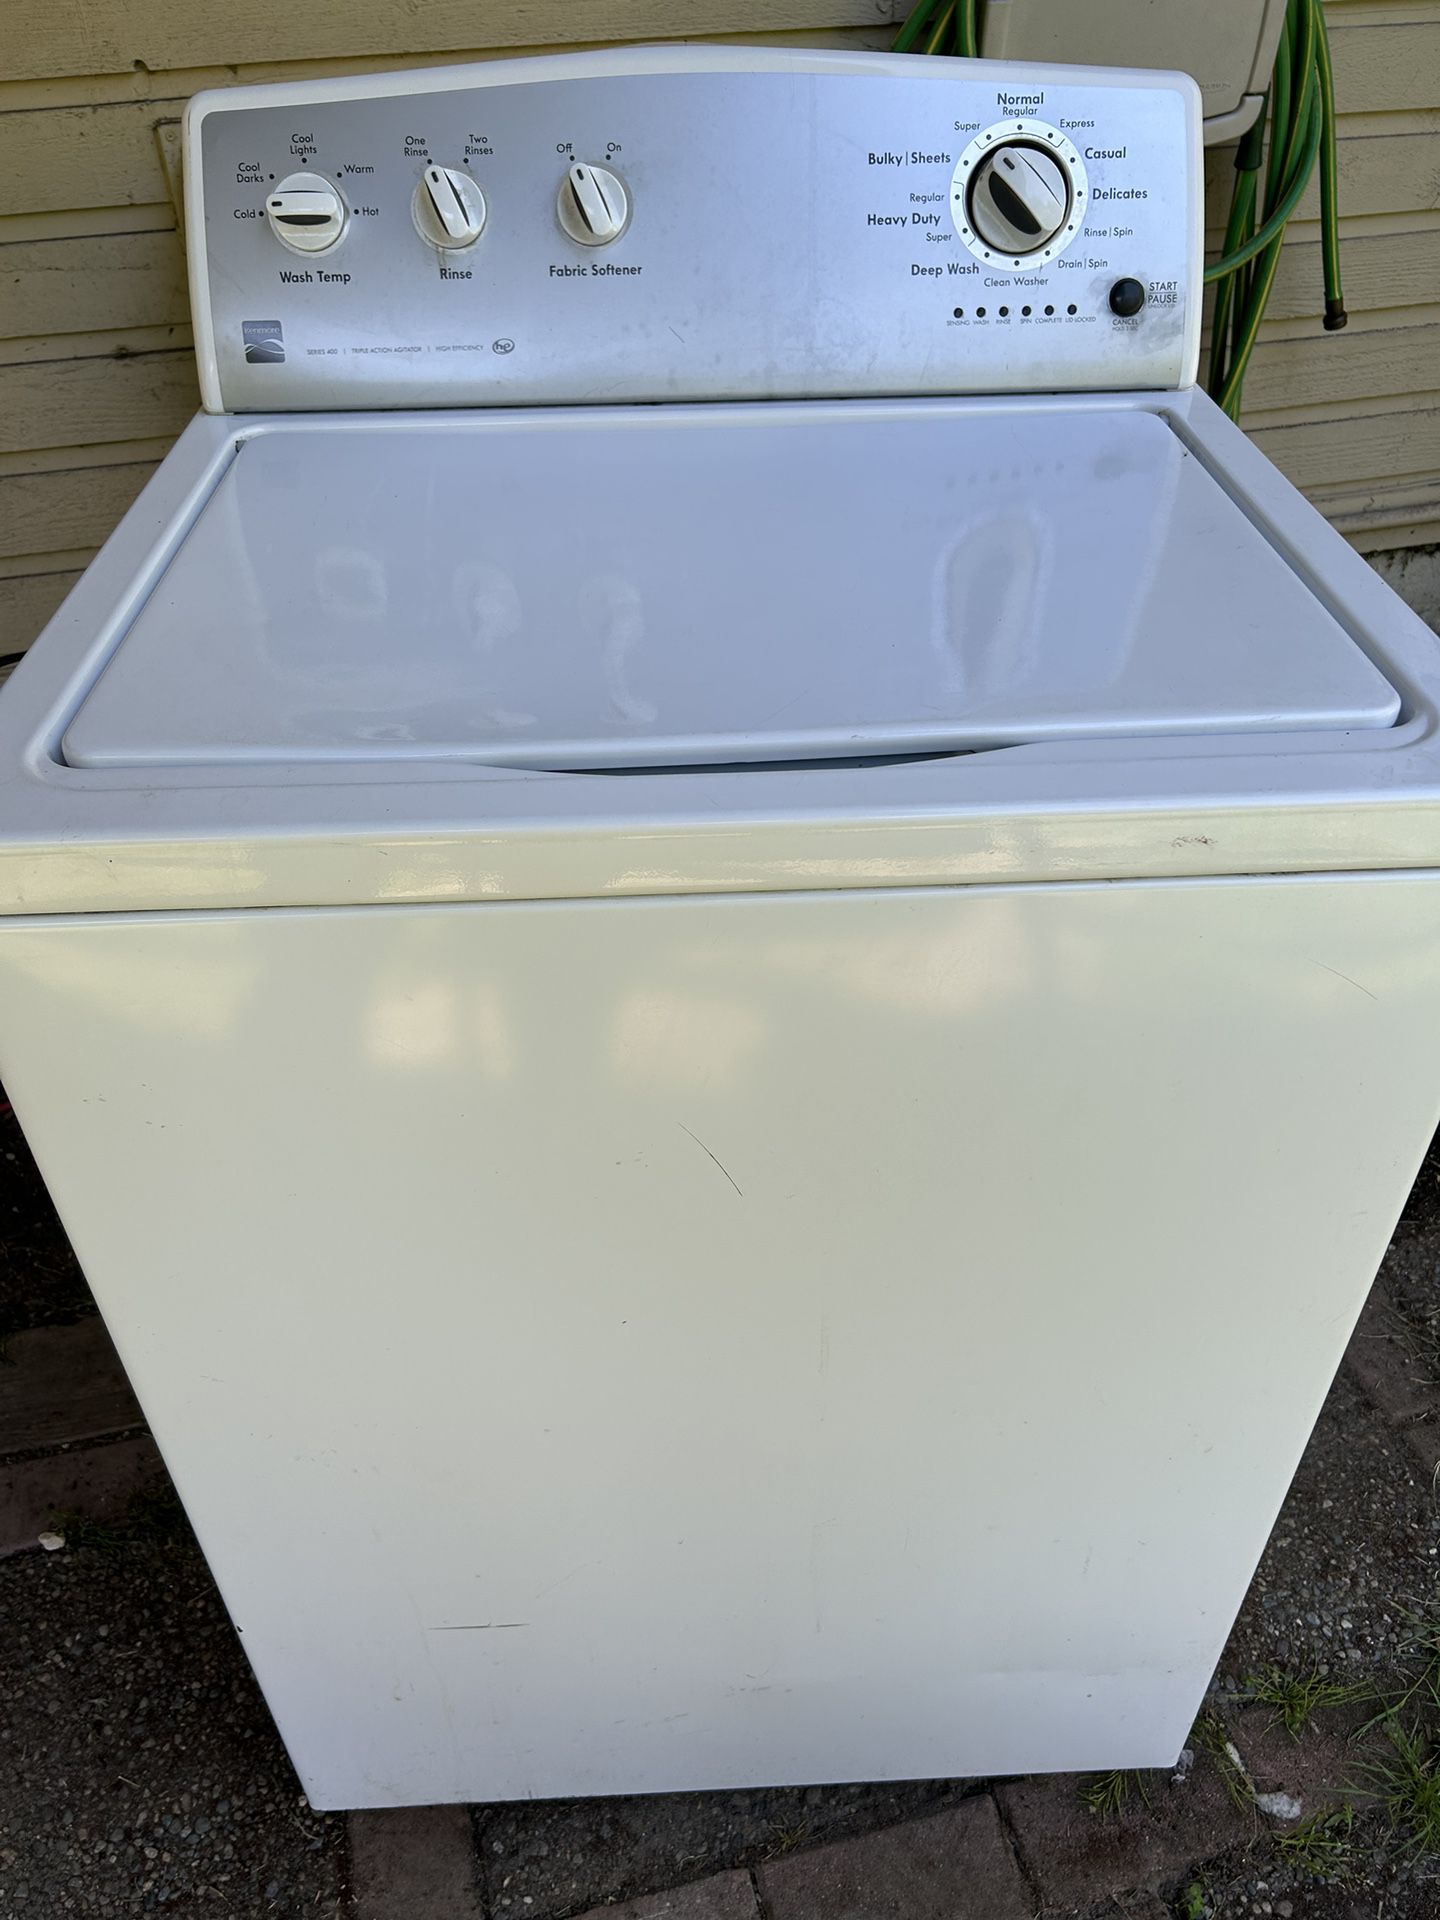 Kenmore Washer in Great Condition!